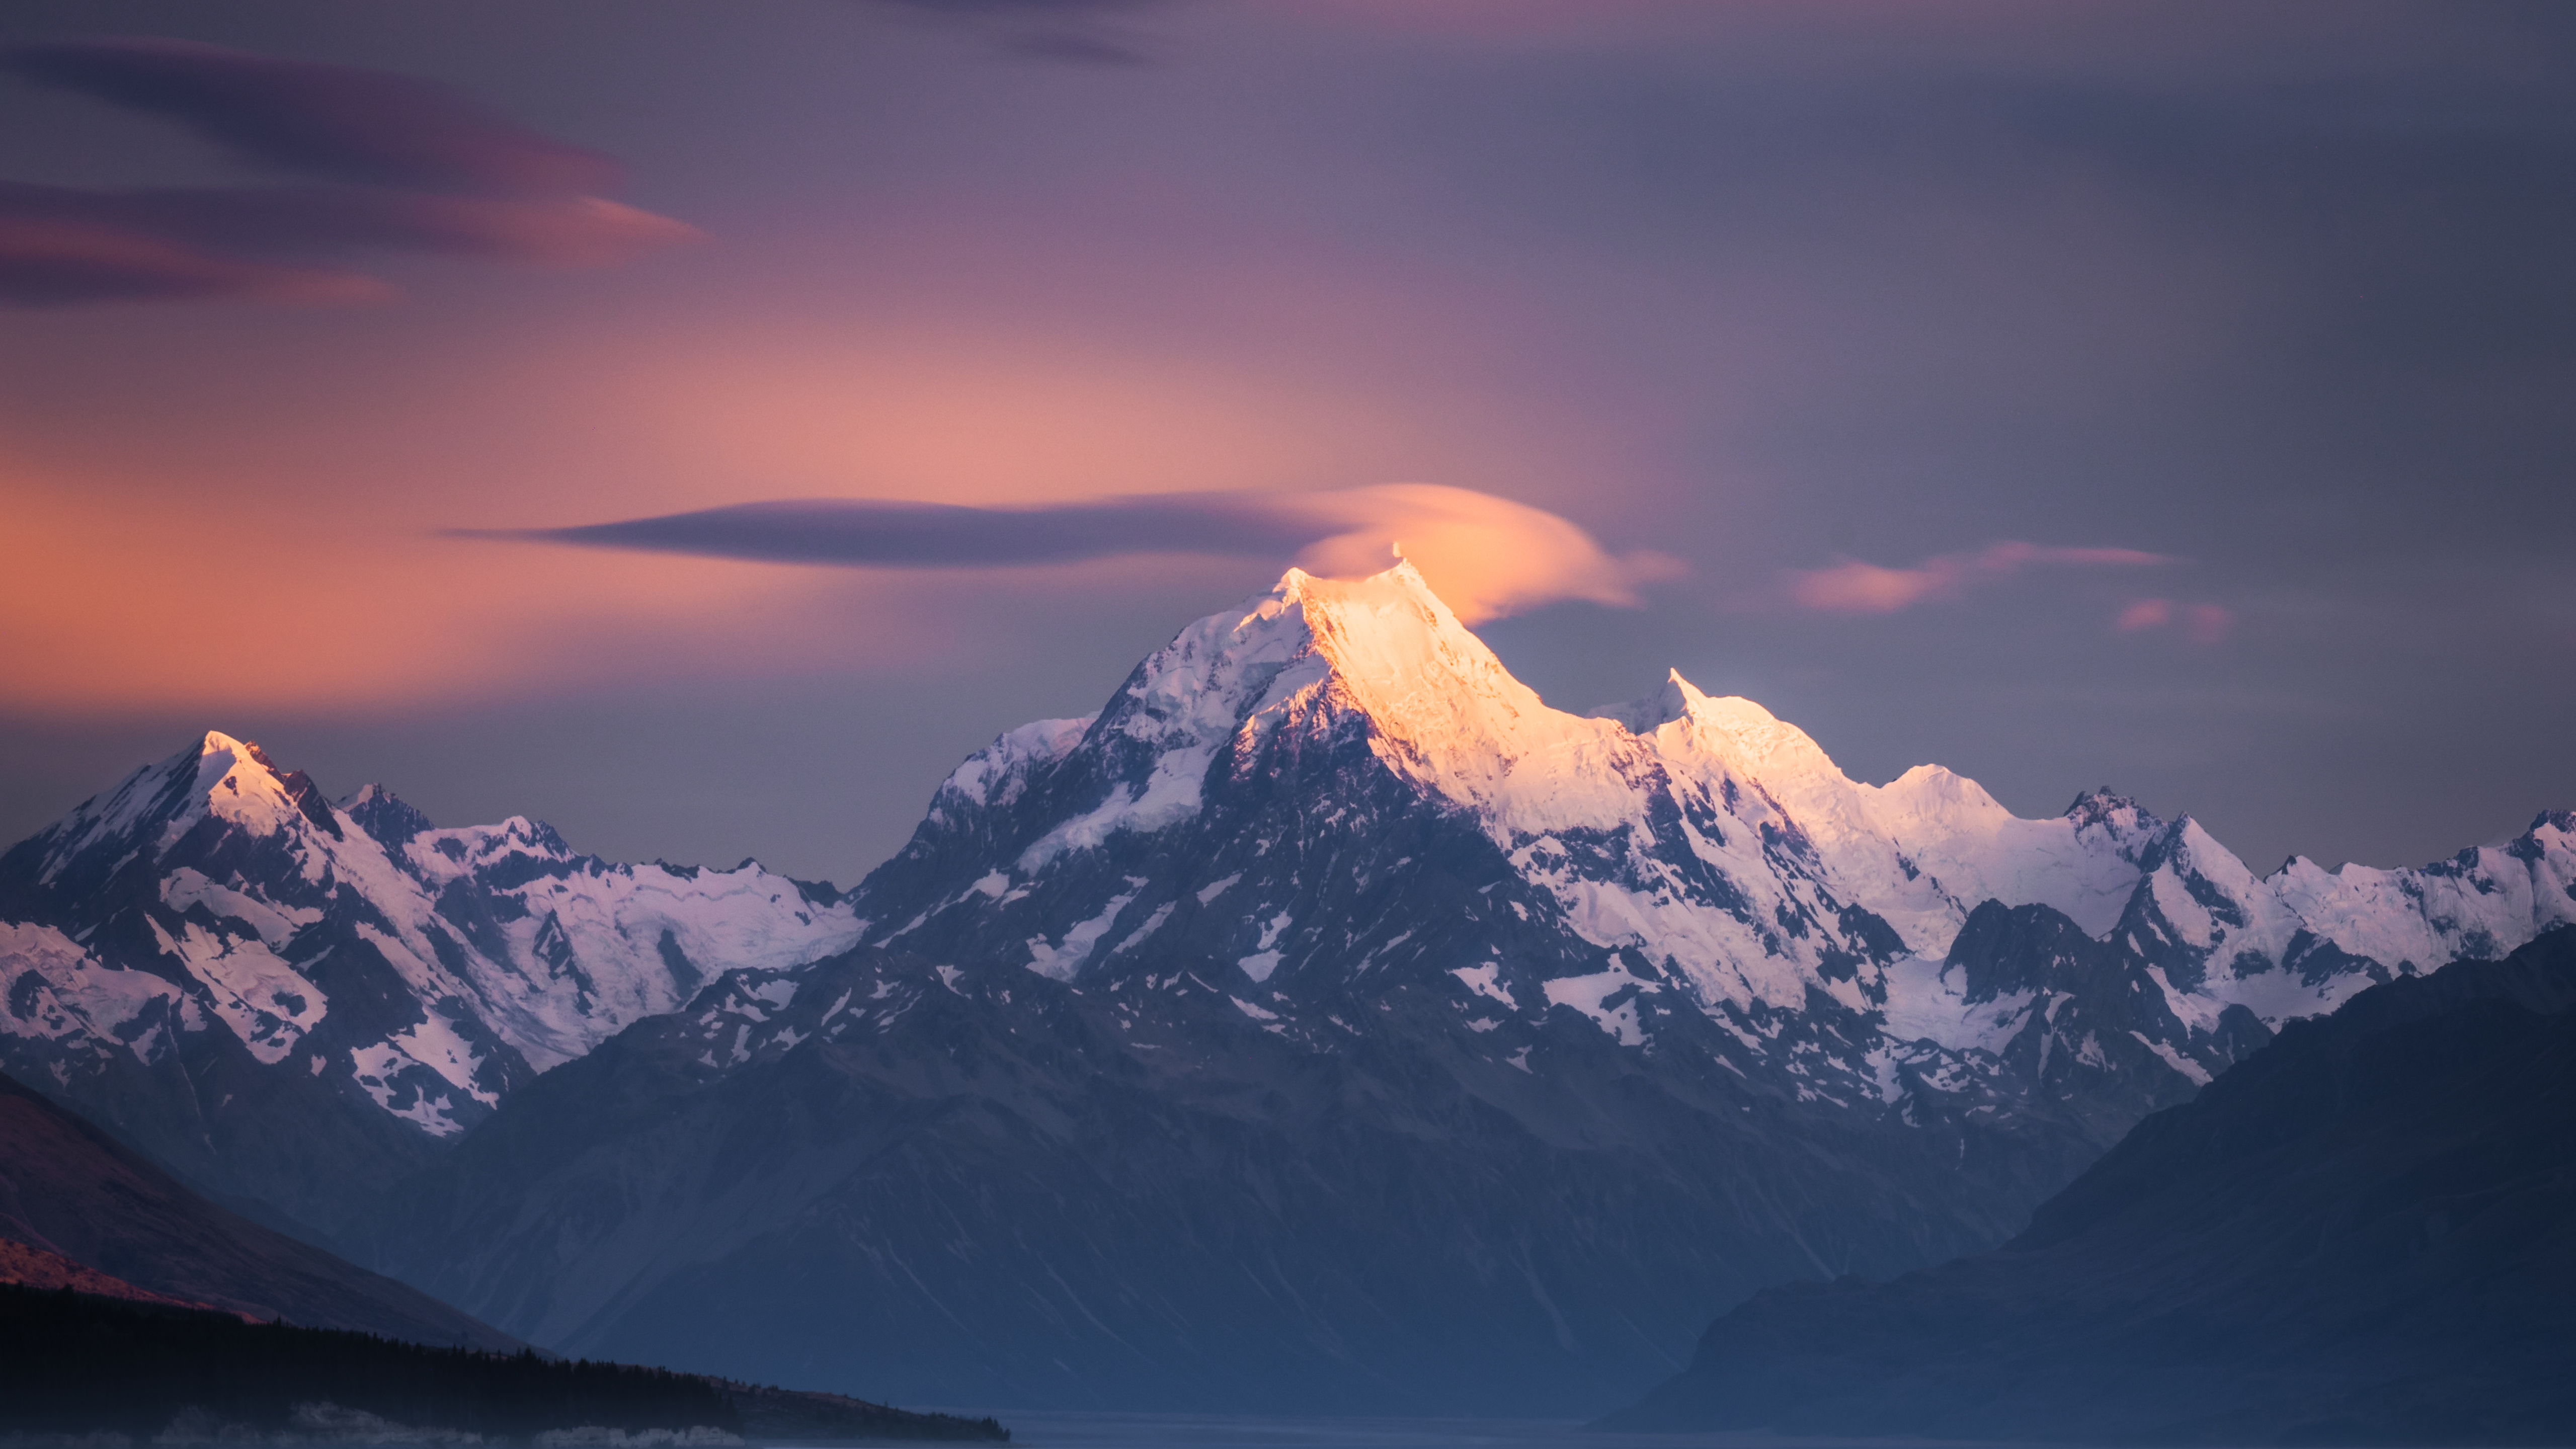 General 5120x2880 landscape nature photography mountains Mount Cook New Zealand snow peak clouds sunset